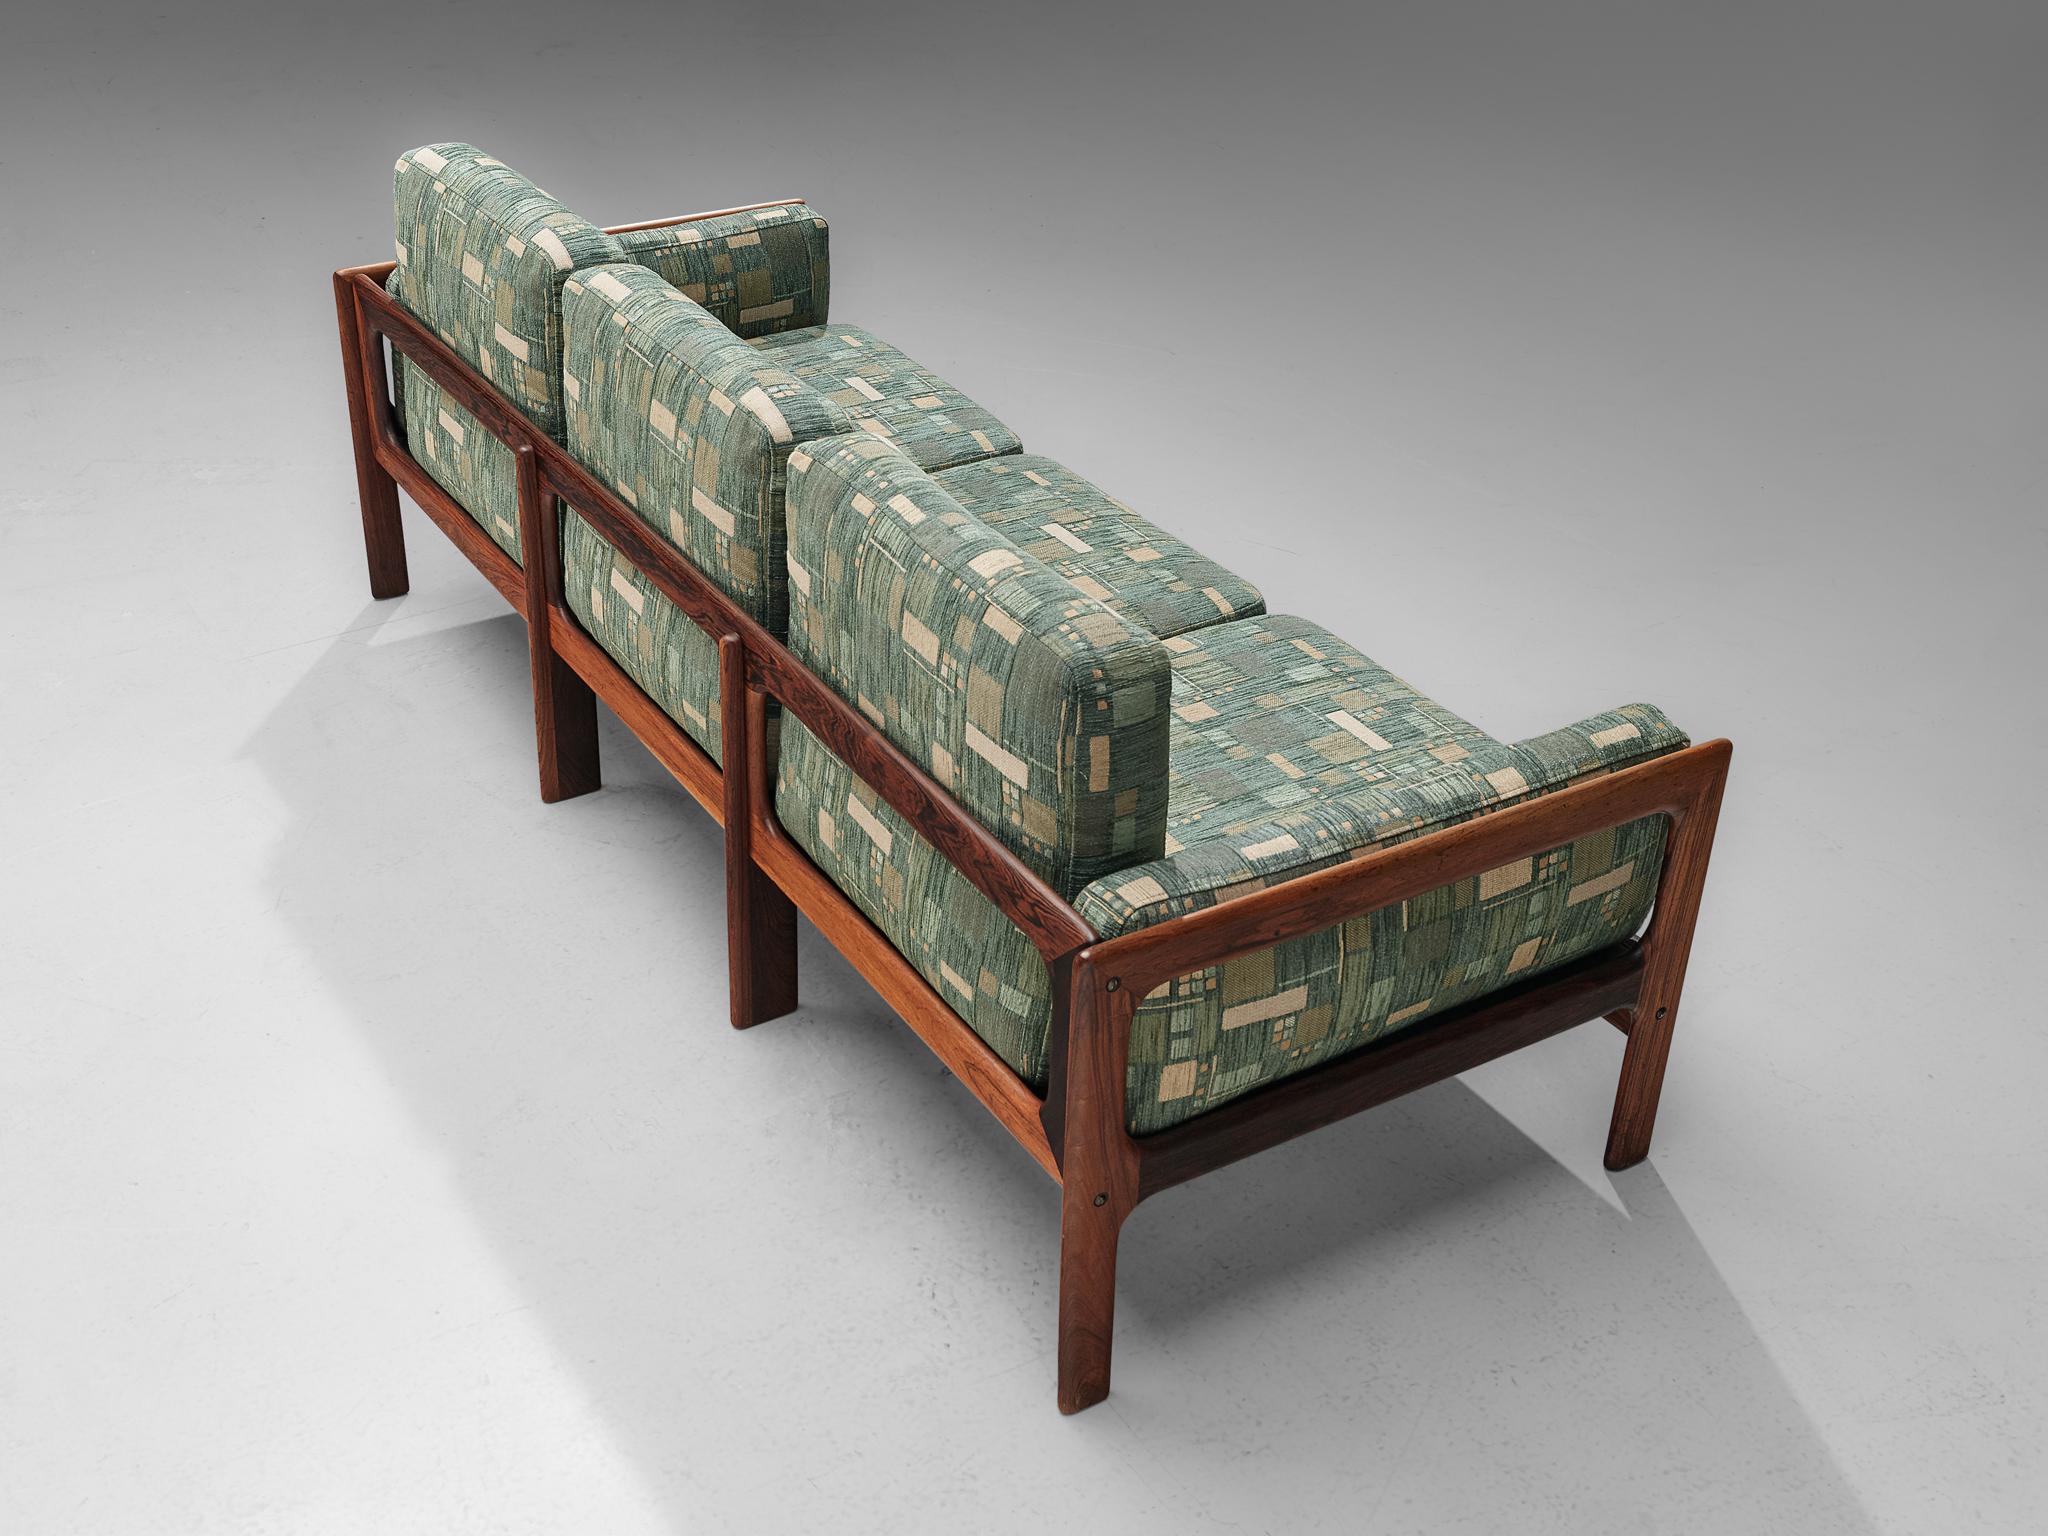 Mid-20th Century Danish Sofa in Green Patterned Upholstery